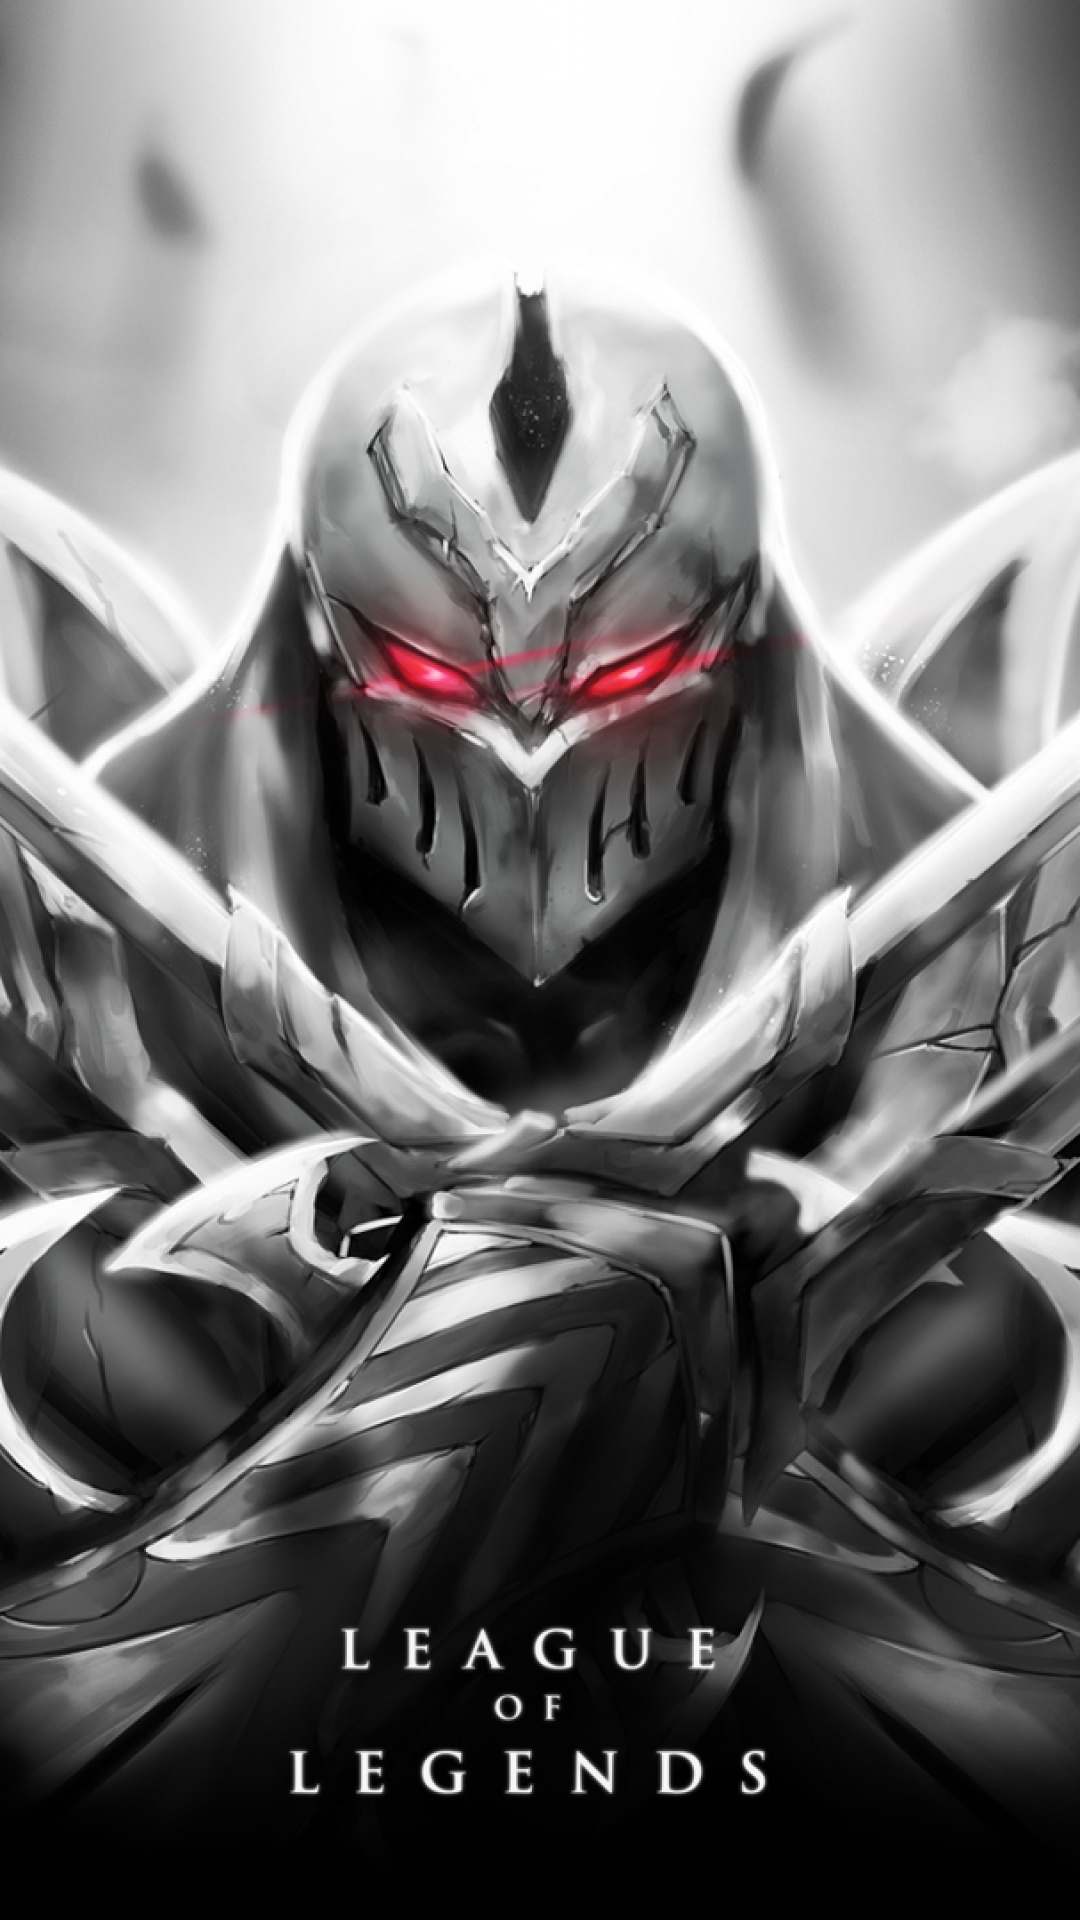 league of legends phone wallpaper,helmet,fictional character,black and white,vehicle,illustration